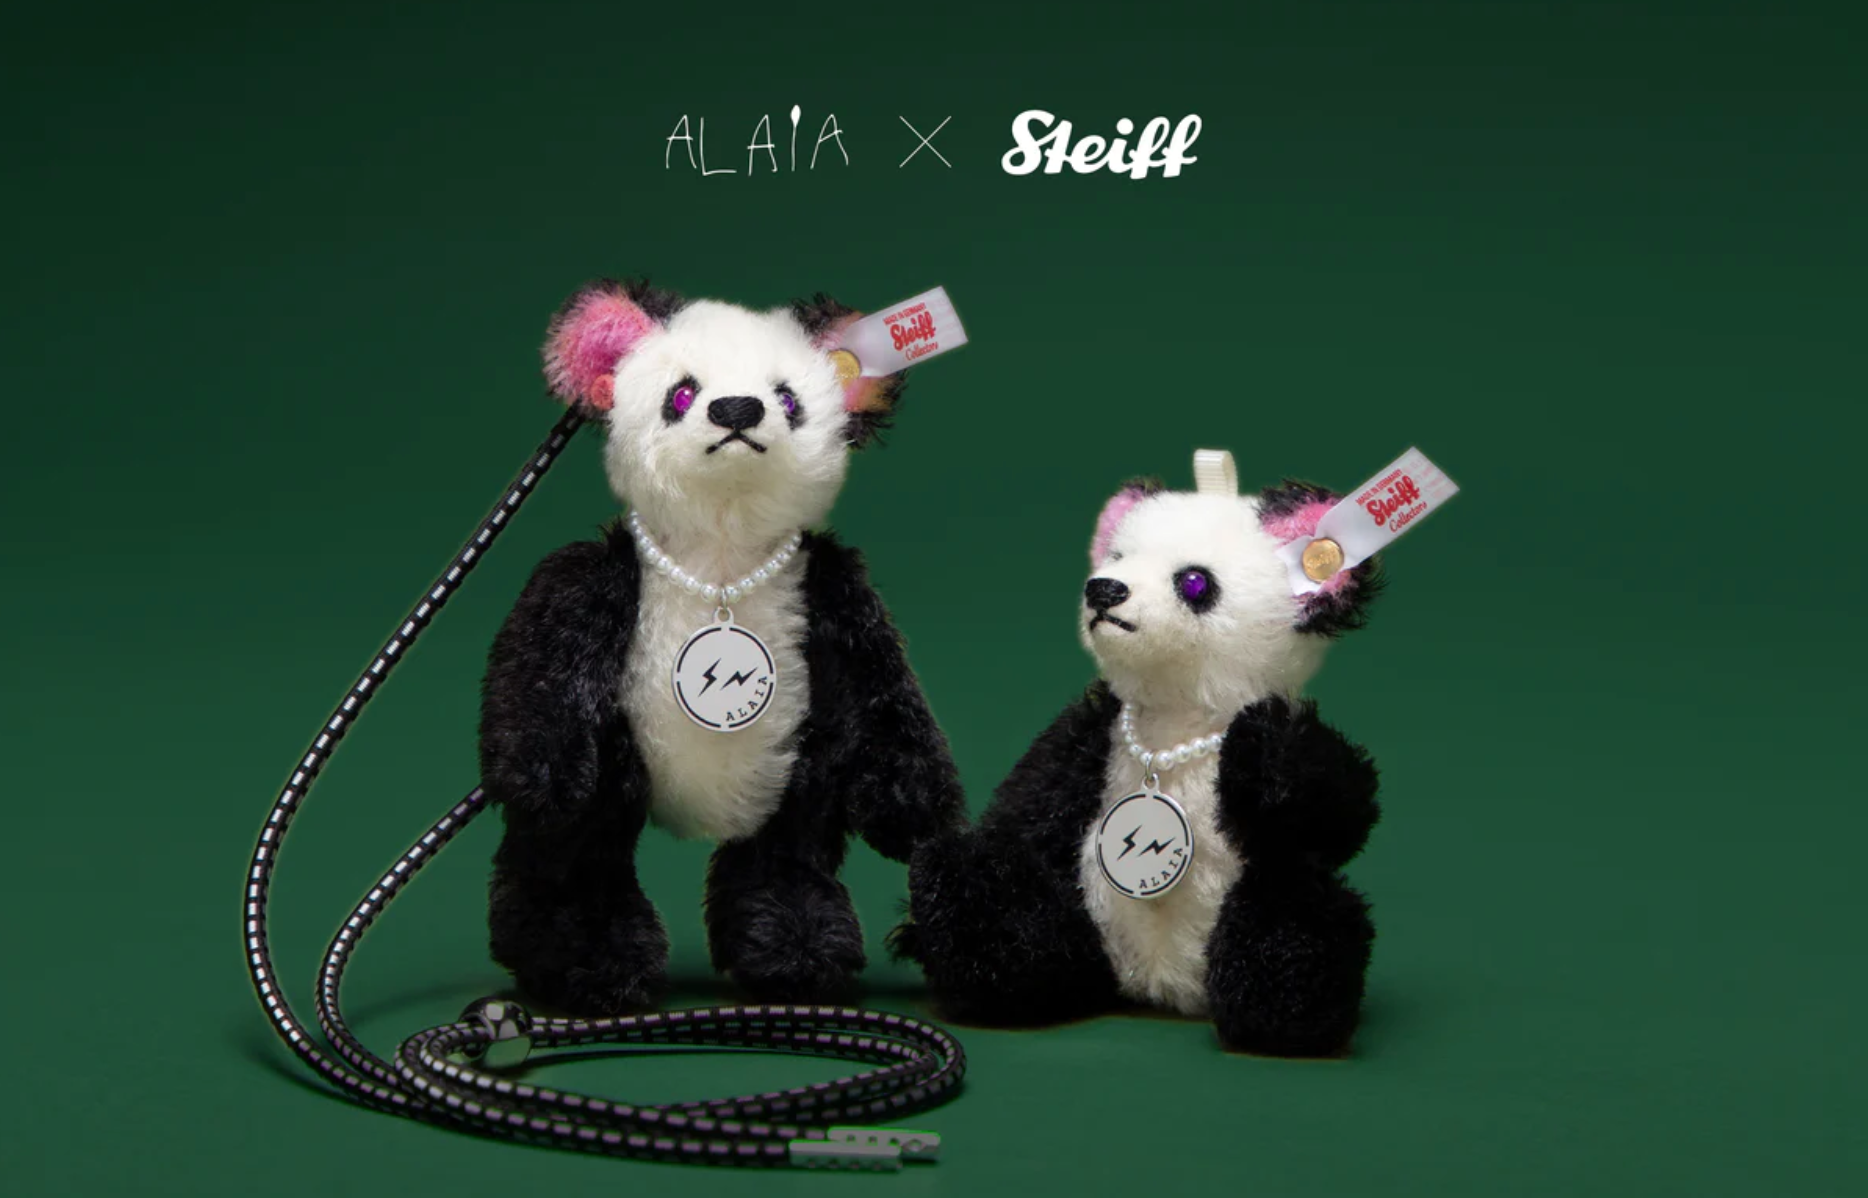 The Fragment Design x Alaia x Steiff “Mini Panda Bearry Cute” Key Ring is a mini version of what was released last year. Photo: Juice Store